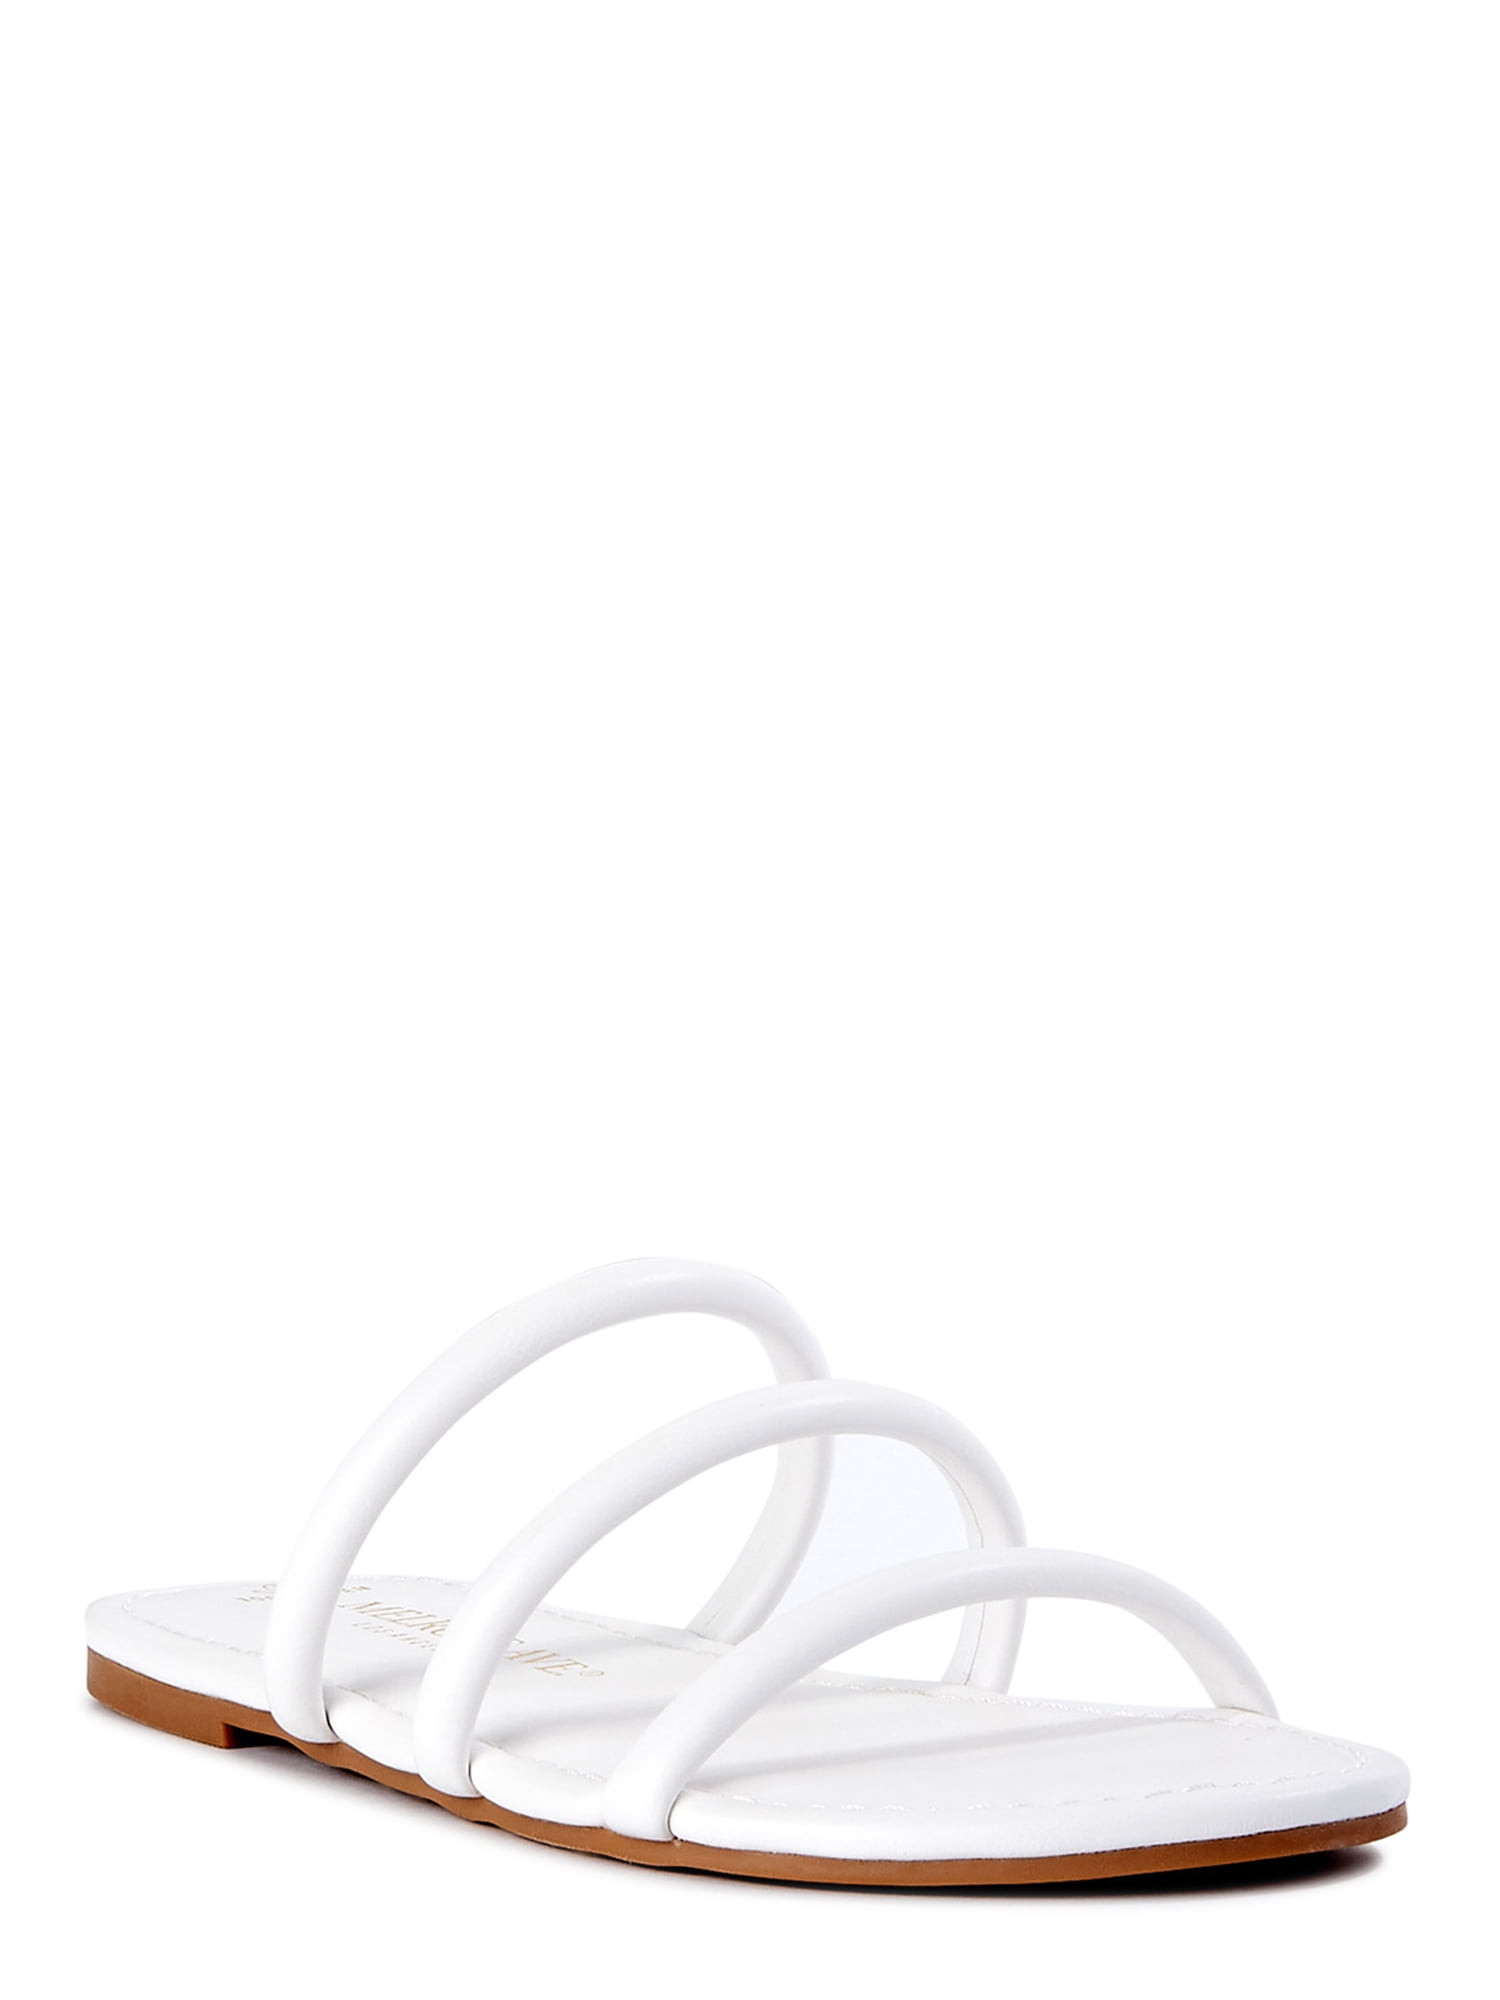 Melrose Ave Women's Faux Leather Three Strap Sandals